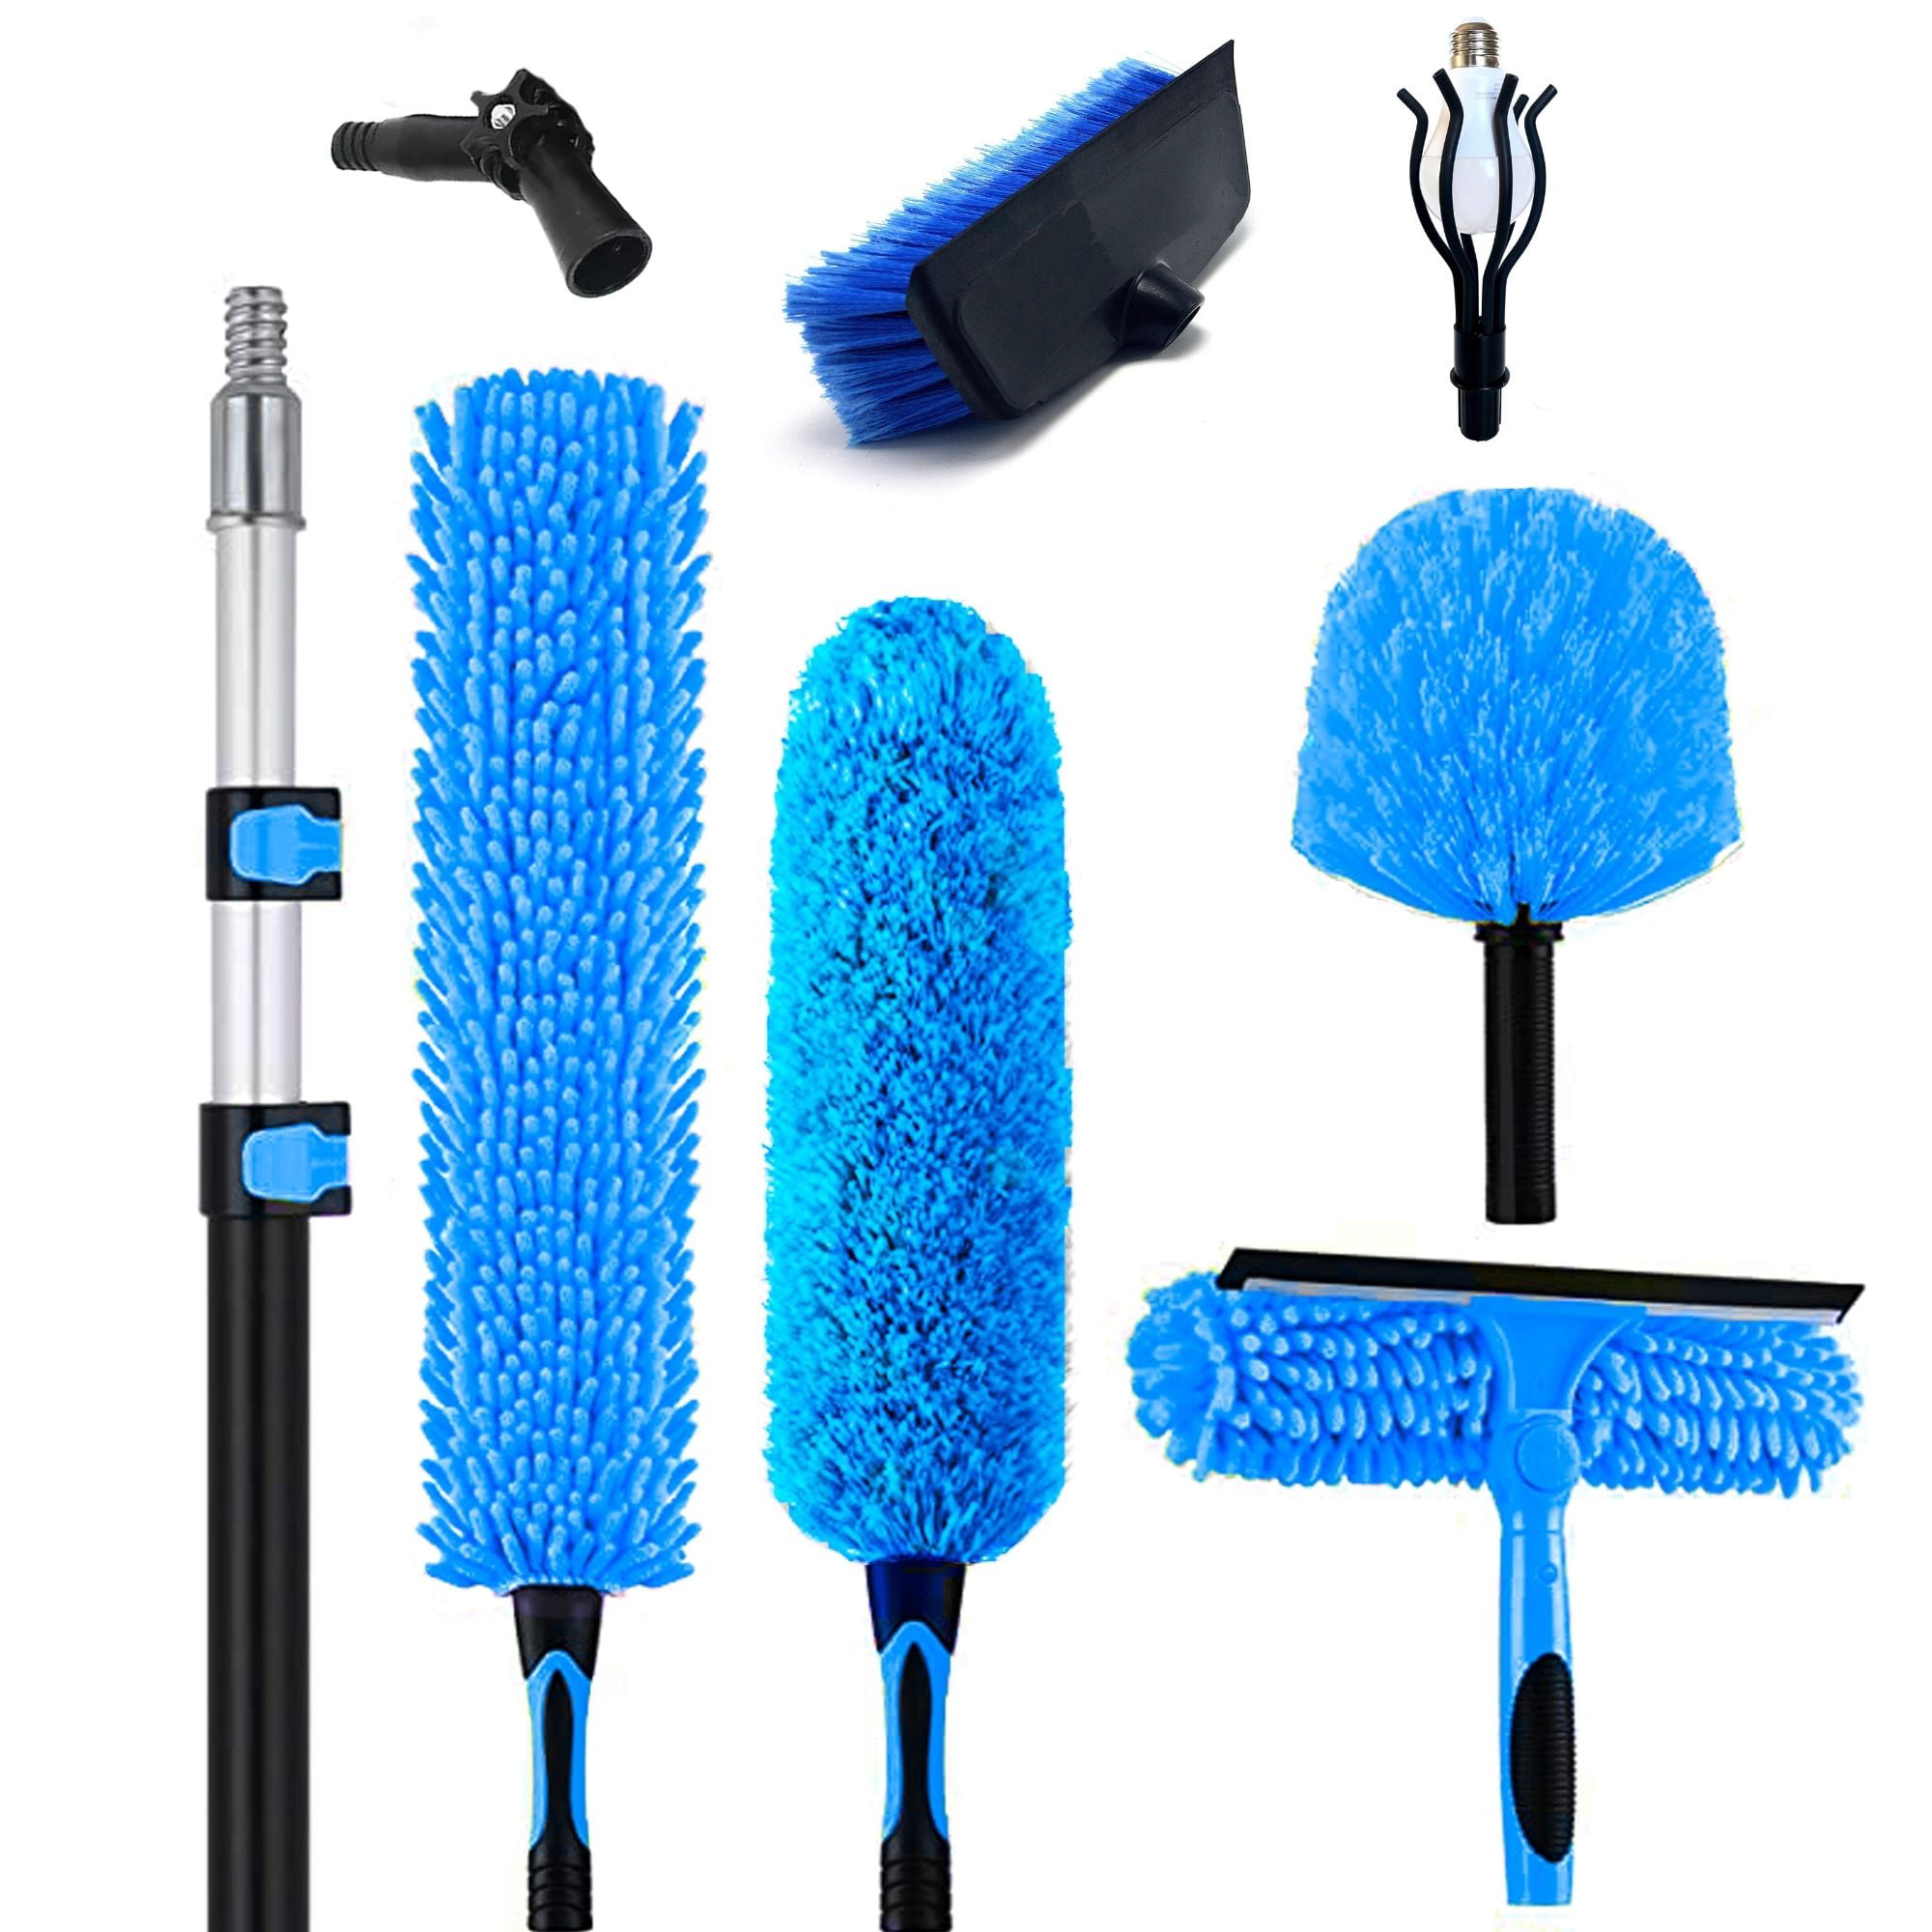 Universal Joint Microfiber Ceiling Fan Duster Window Squeegee Buyplus Duster Cleaning Kit with 5-to-20 feet Purpose Extension Pole Feather Duster 